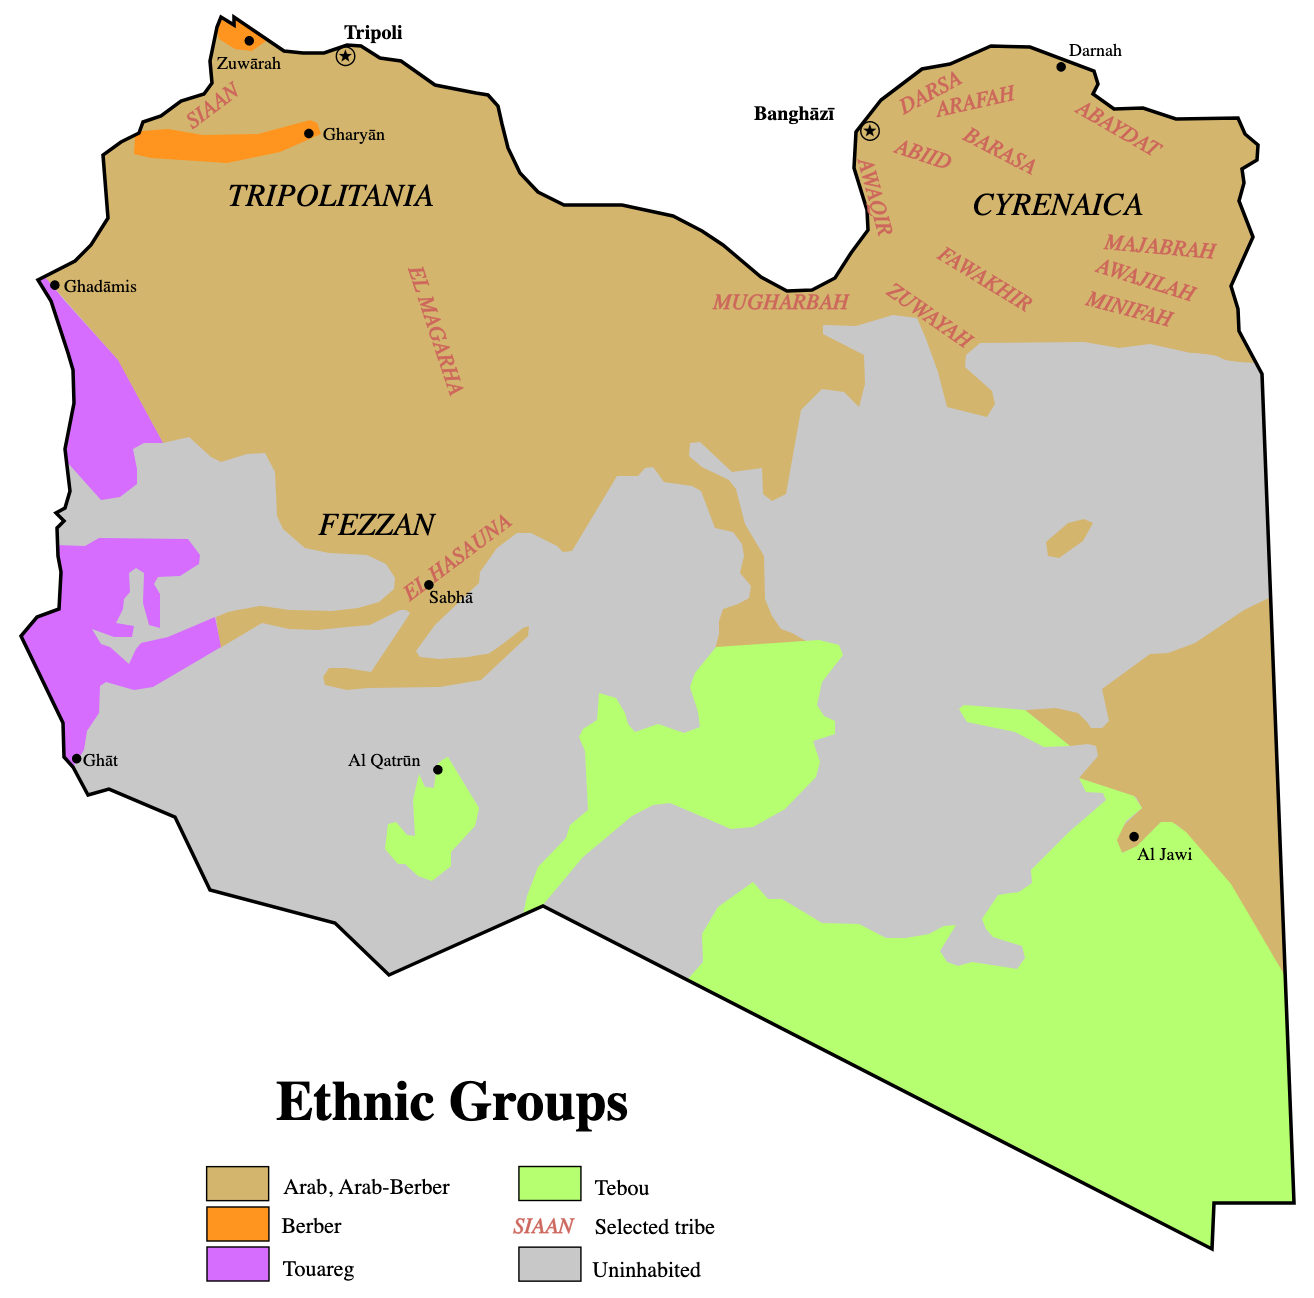 Geographical distribution of ethnicities in Libya [Wikipedia].